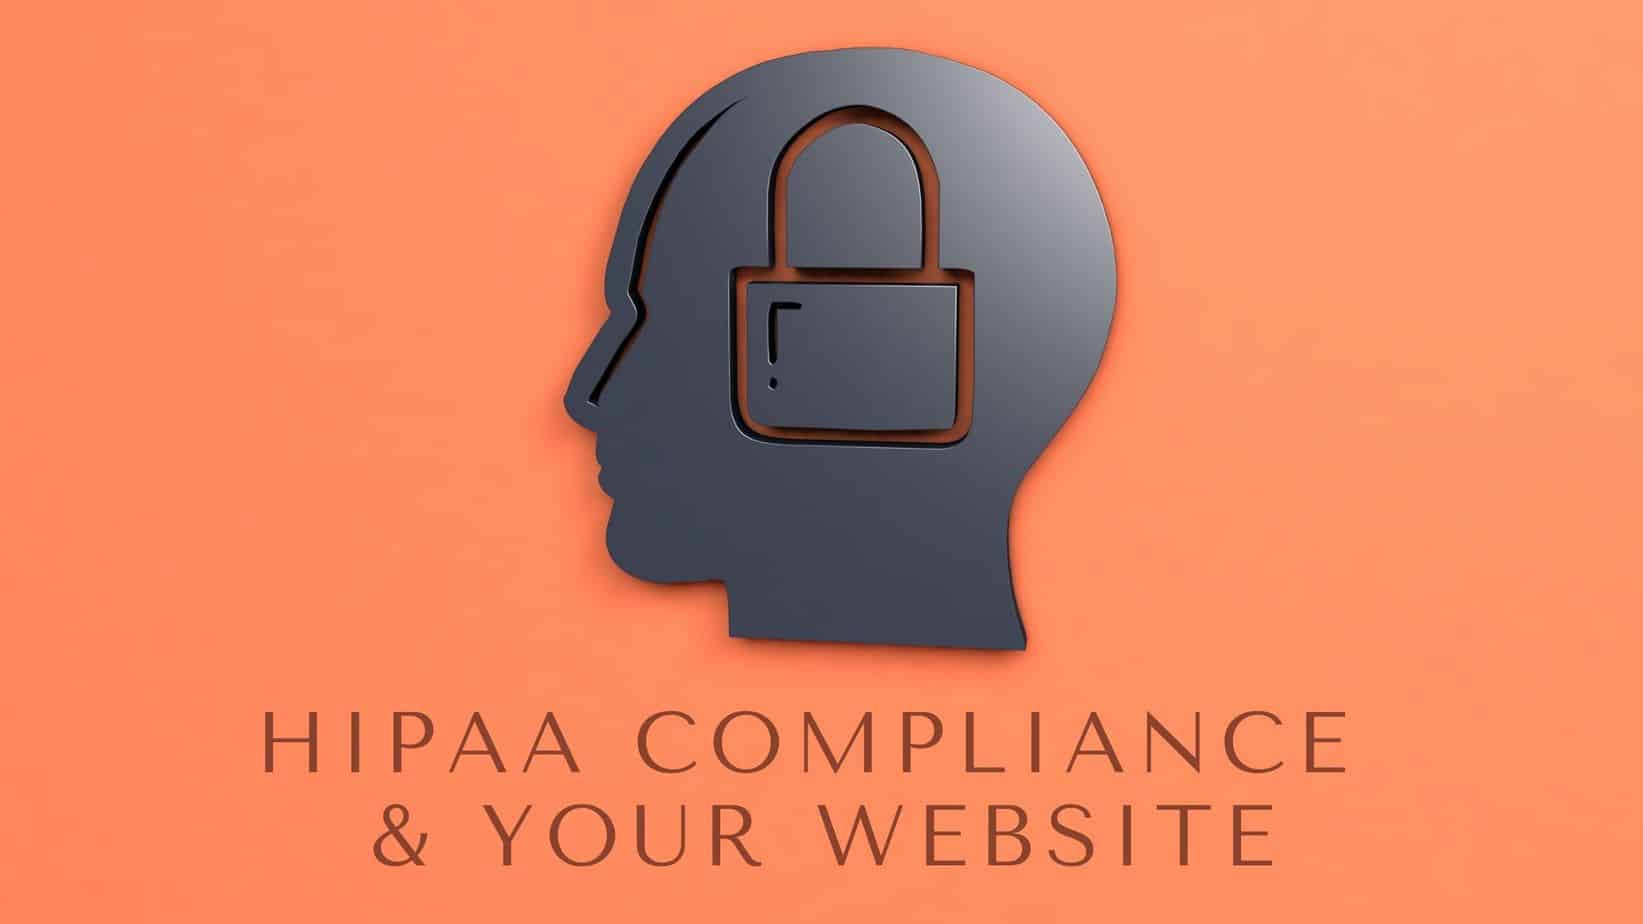 Featured image for “HIPAA Compliance & Your Website”